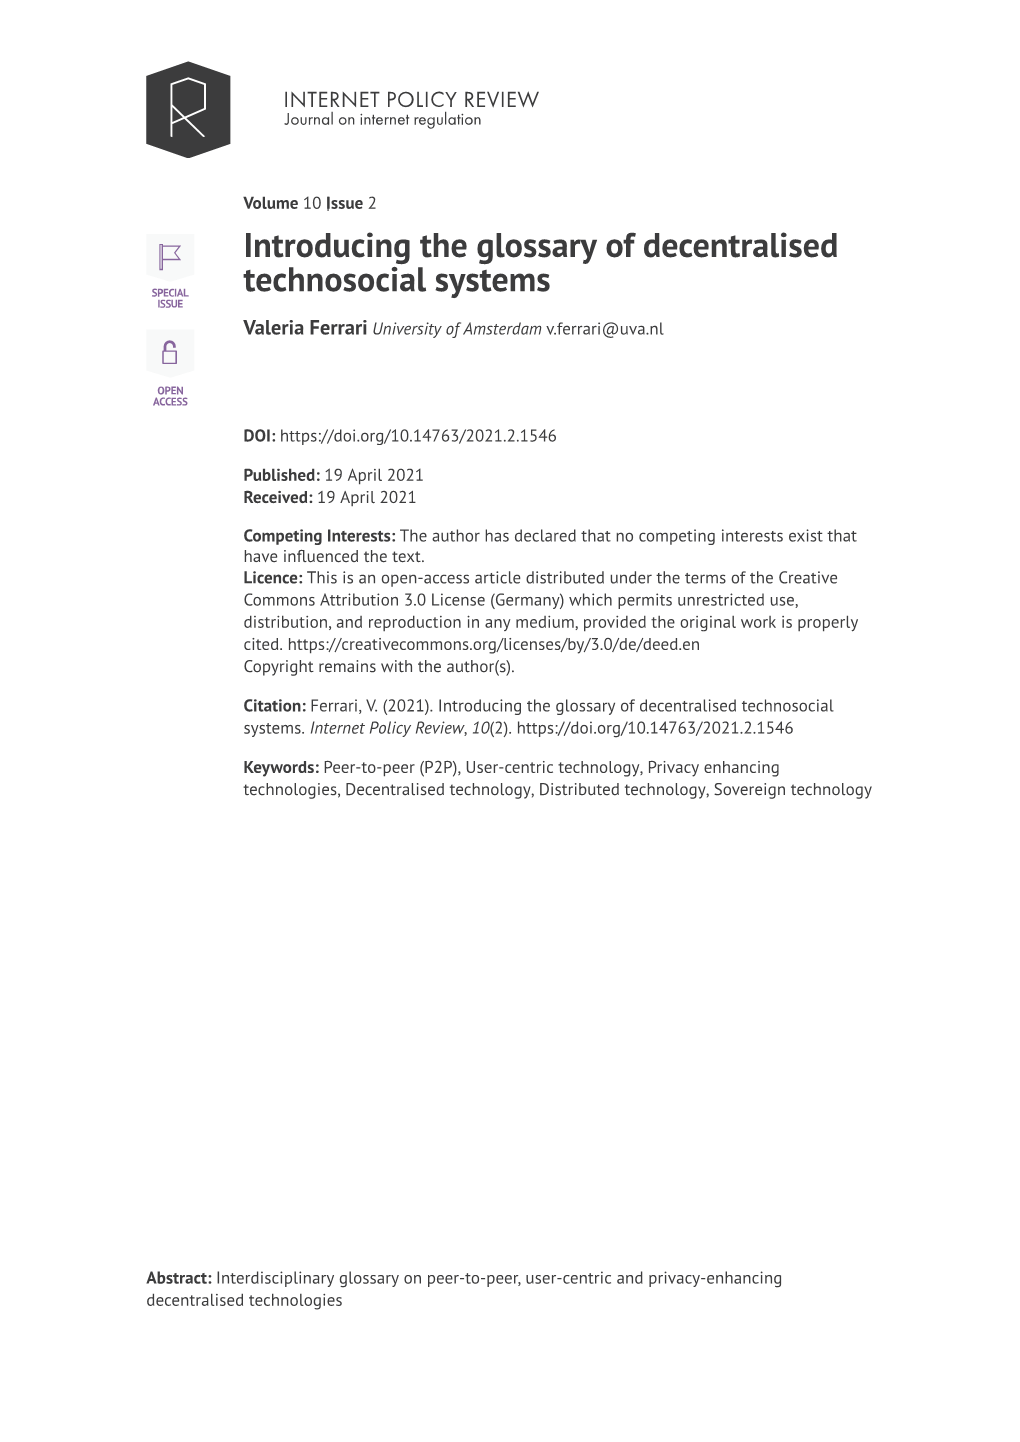 Introducing the Glossary of Decentralised Technosocial Systems